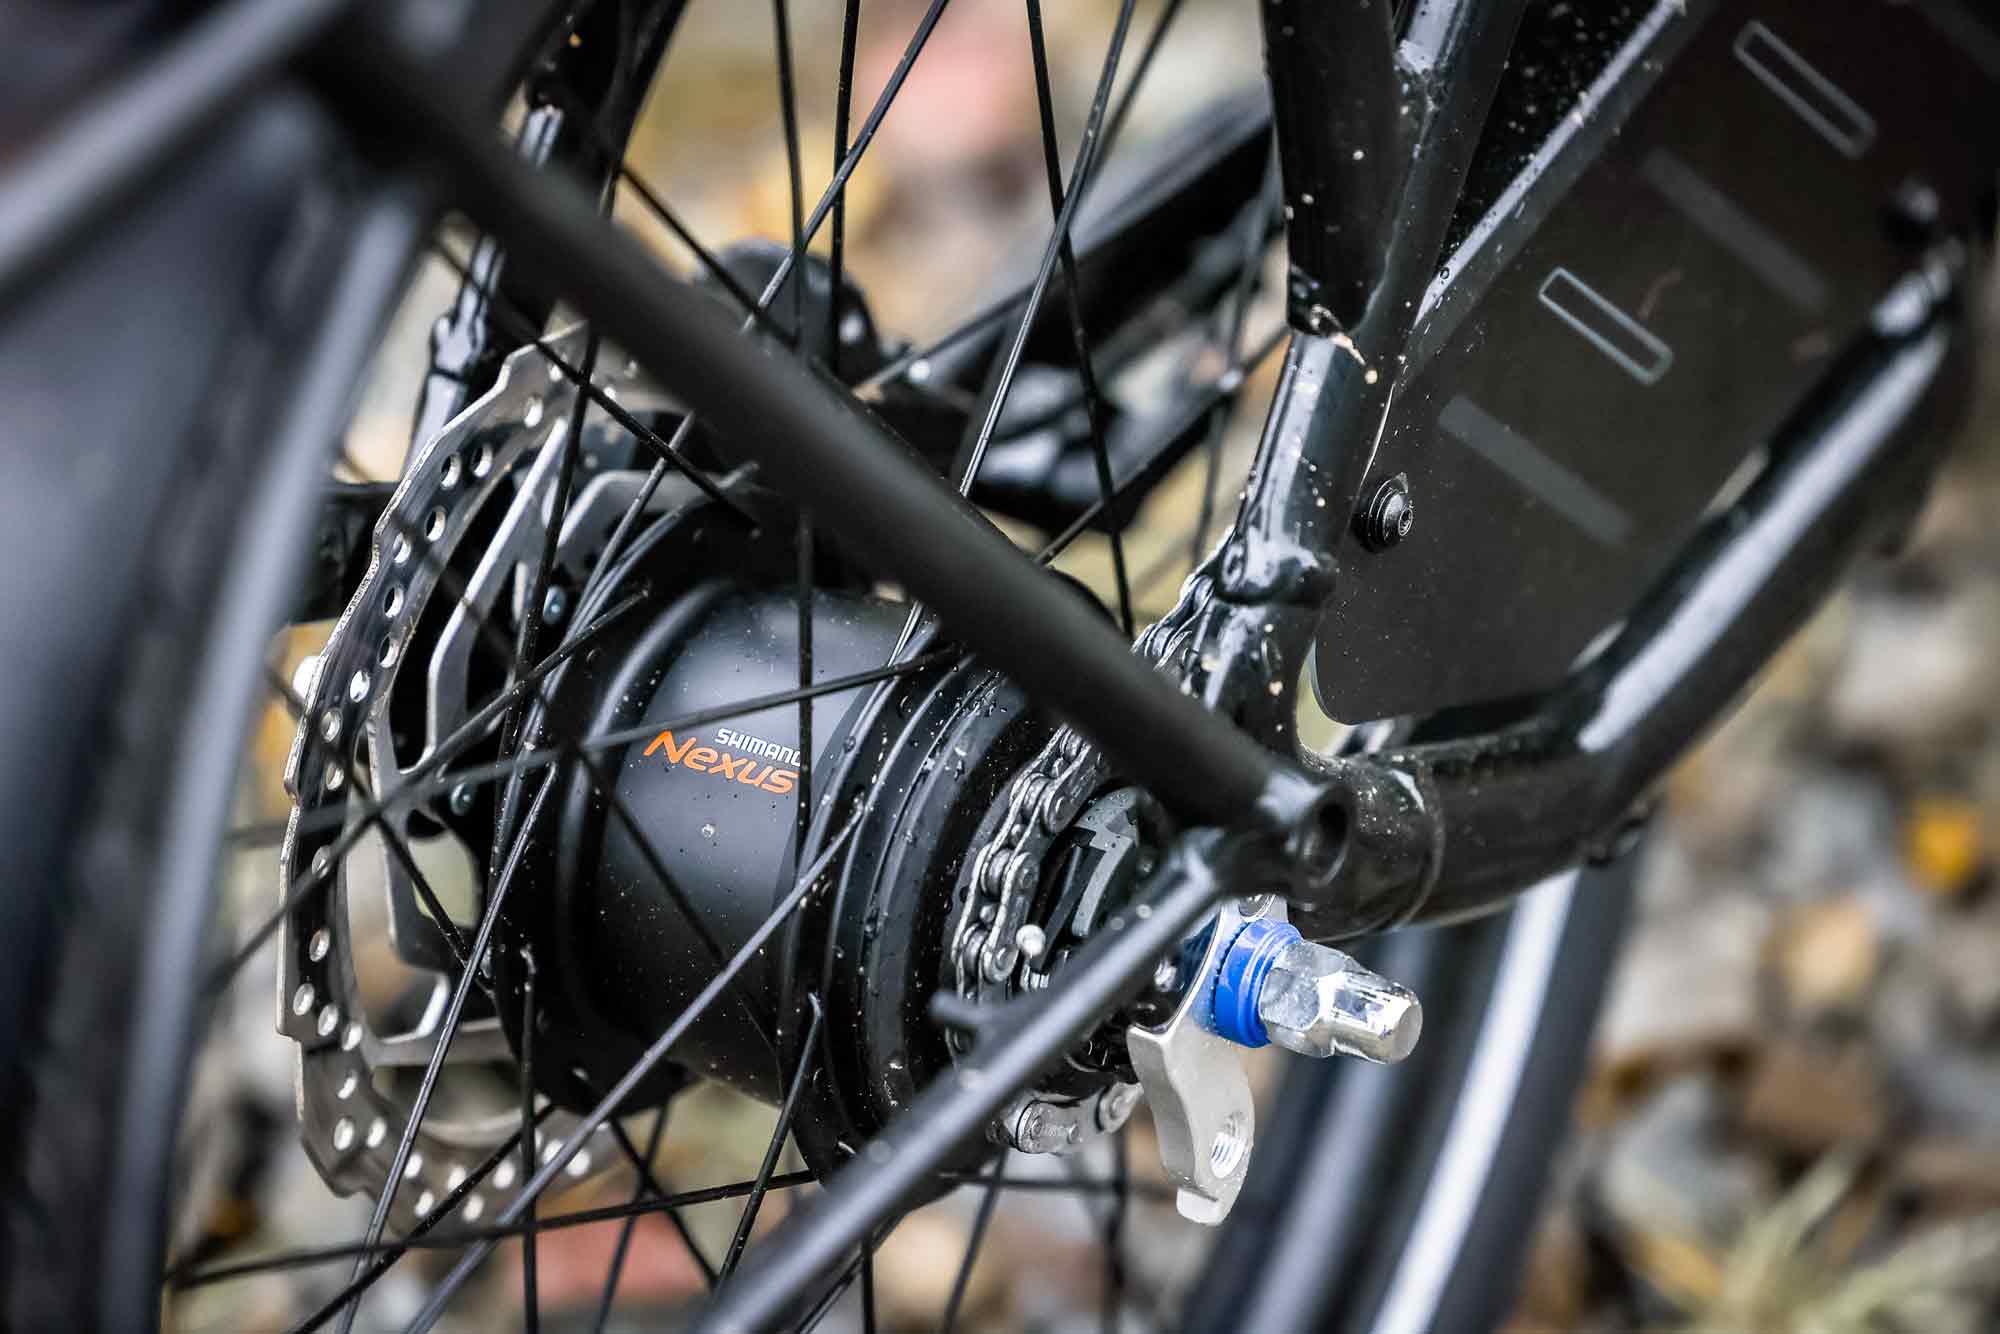 Shifting gears with the shimano 8-speed nexus hub is sometimes a little choppy.